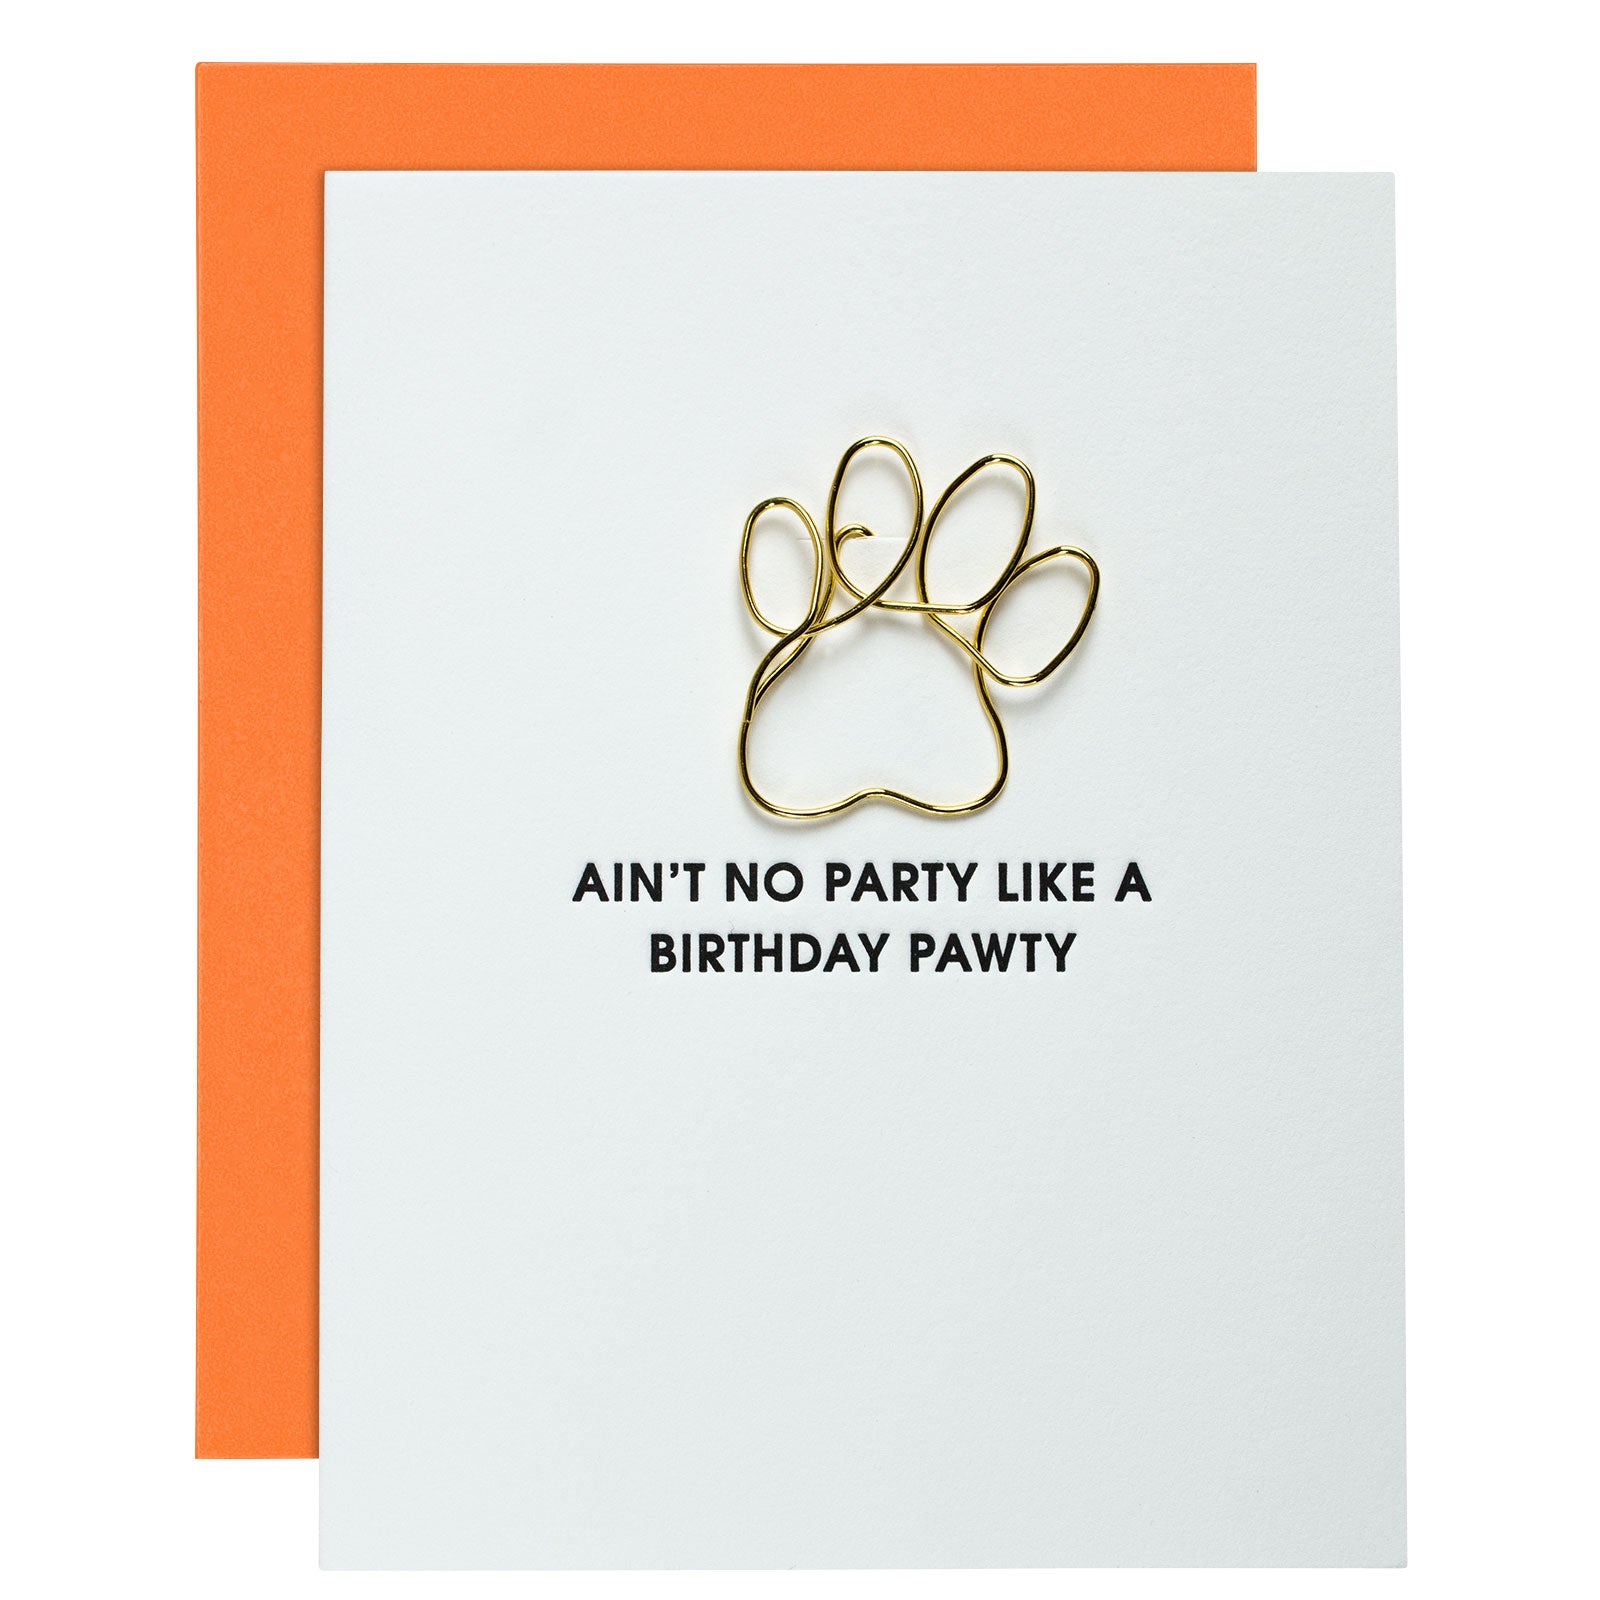 Ain't No Party Like a Birthday Pawty Letterpress Card